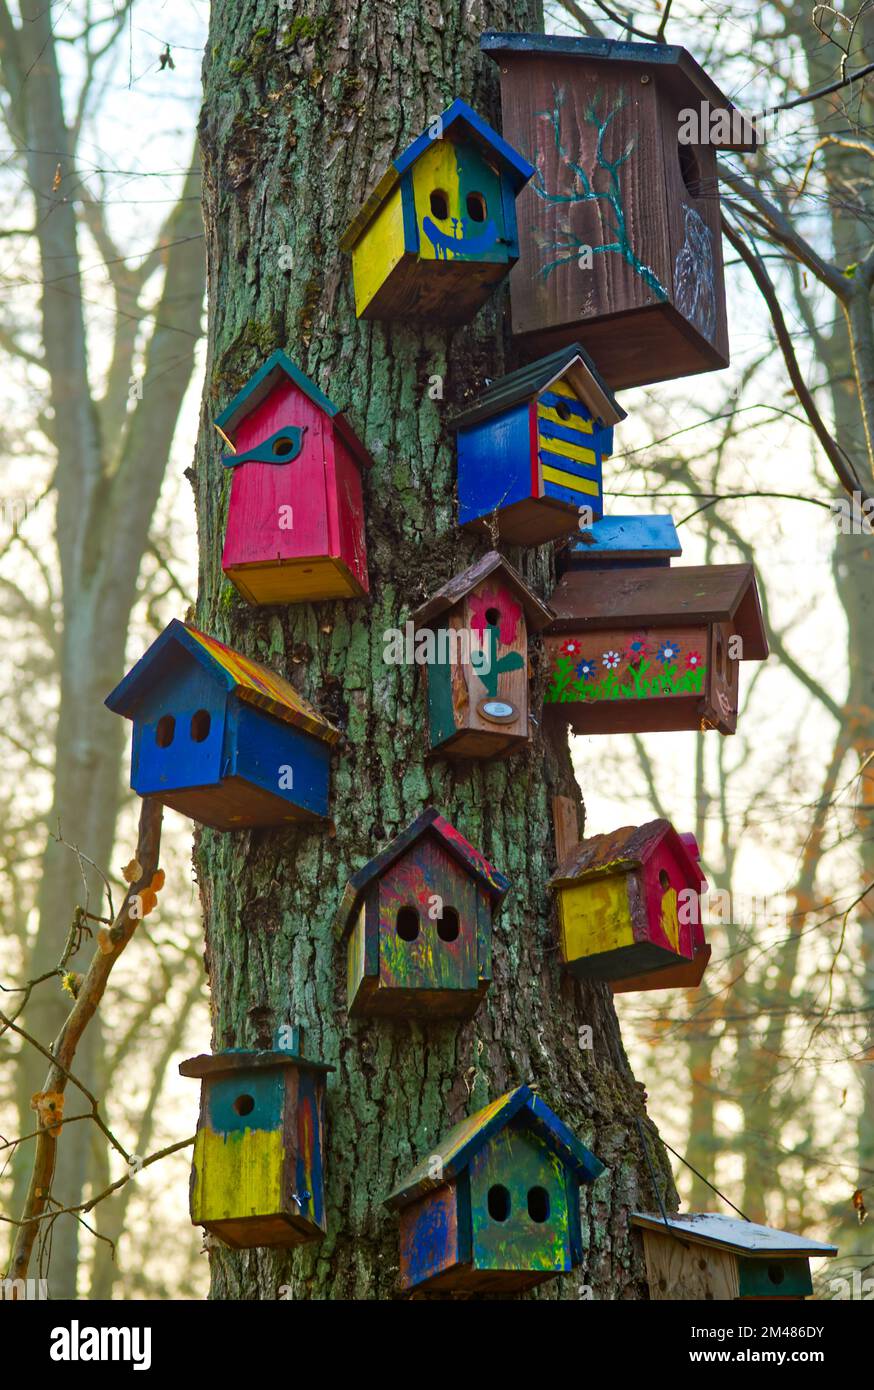 bunch of colorful bird boxes at an oak trunk (location: deer-park 'Alte Fasanerie', Hanau, Germany) Stock Photo